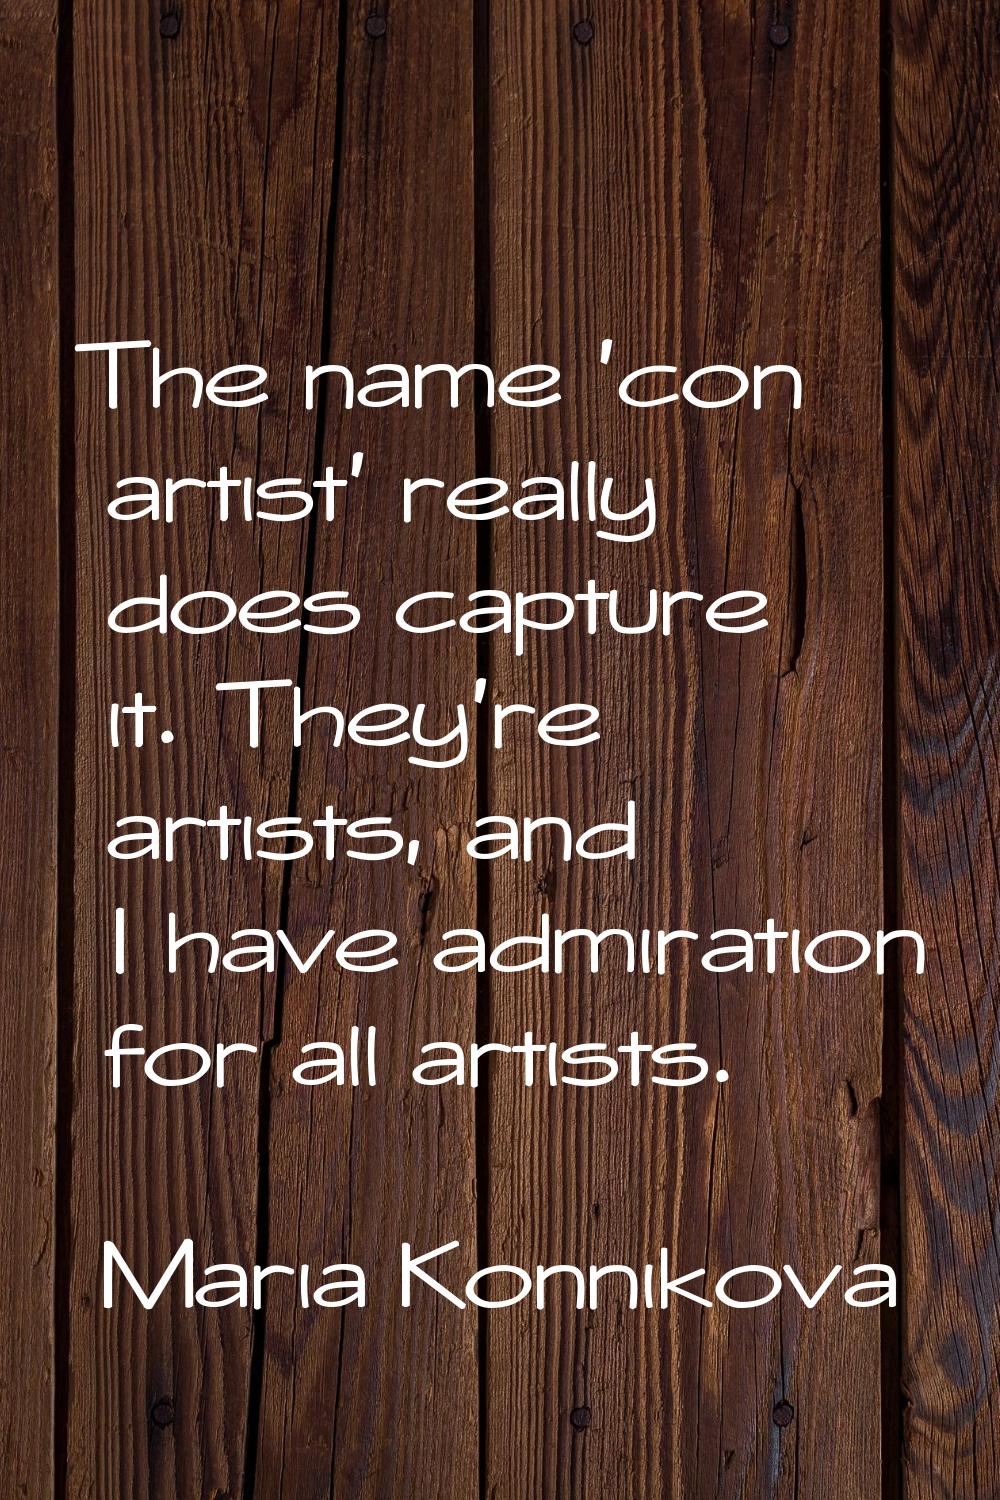 The name 'con artist' really does capture it. They're artists, and I have admiration for all artist